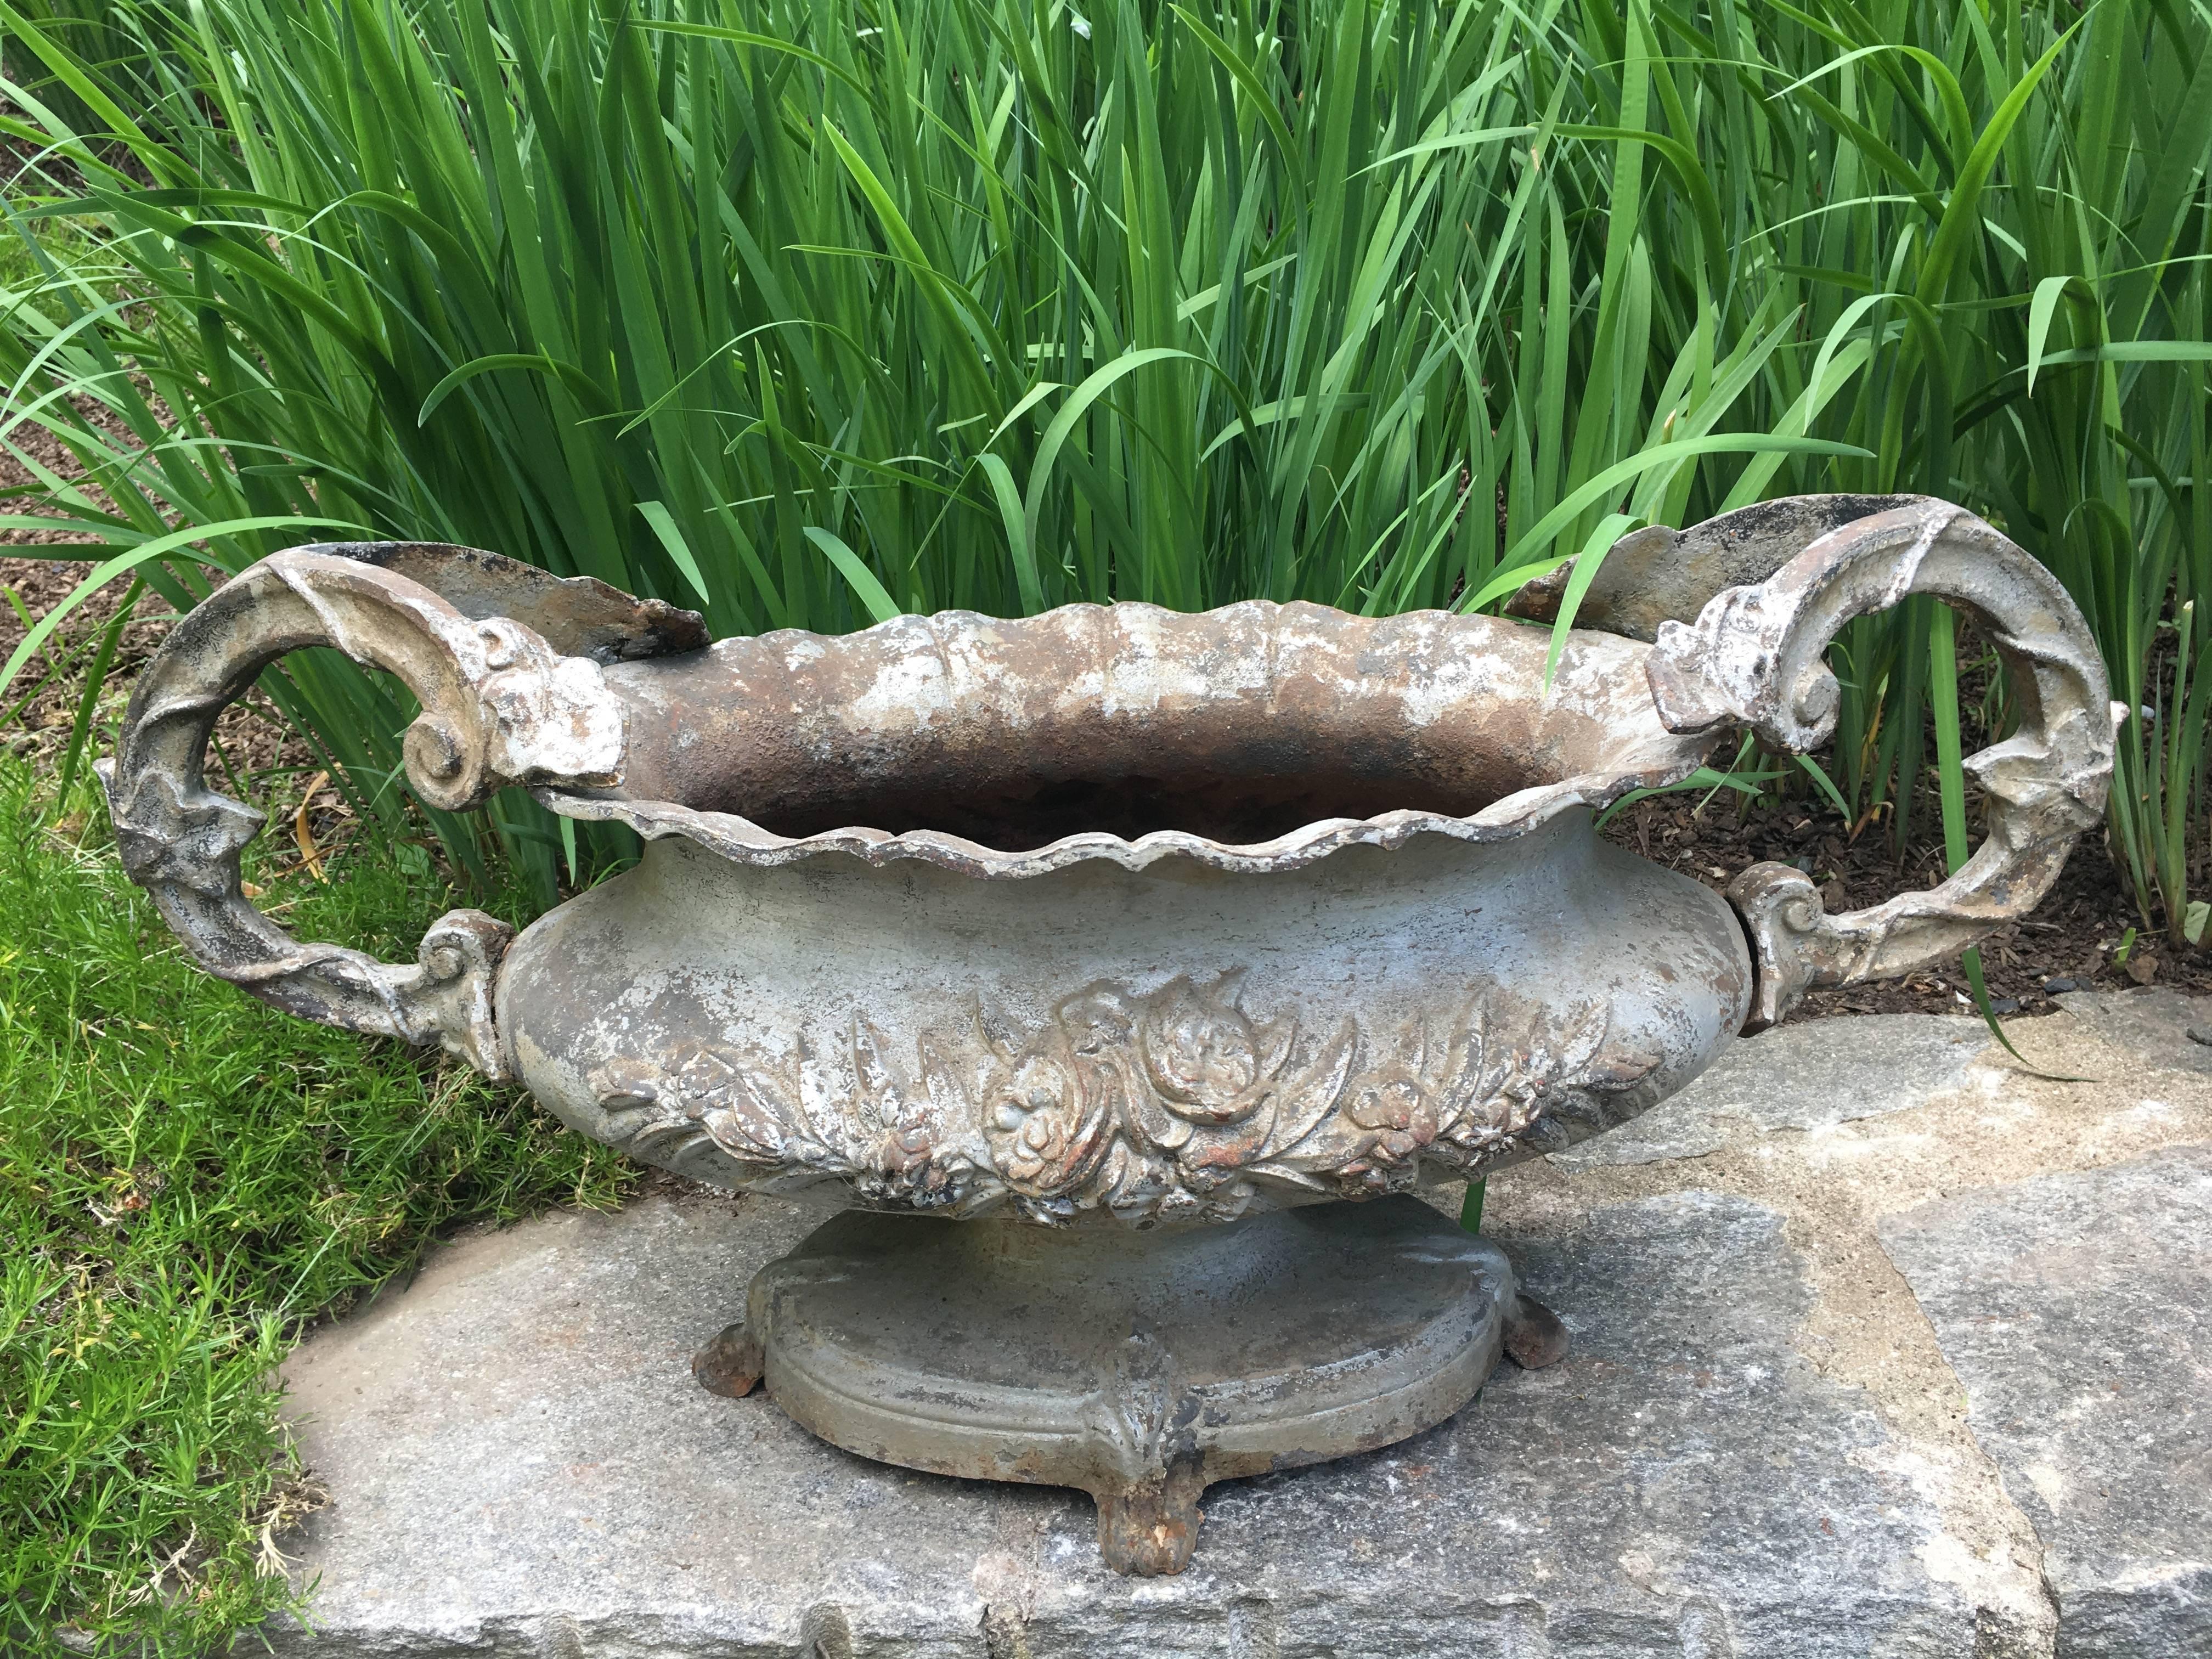 This large tabletop cast iron urn has crisp, detailed casting, elaborate handles, and an oval base with feet. In old silver paint with a bit of surface rusting, it is in wonderful condition with no chips, cracks, breaks, repairs, or missing bits. It